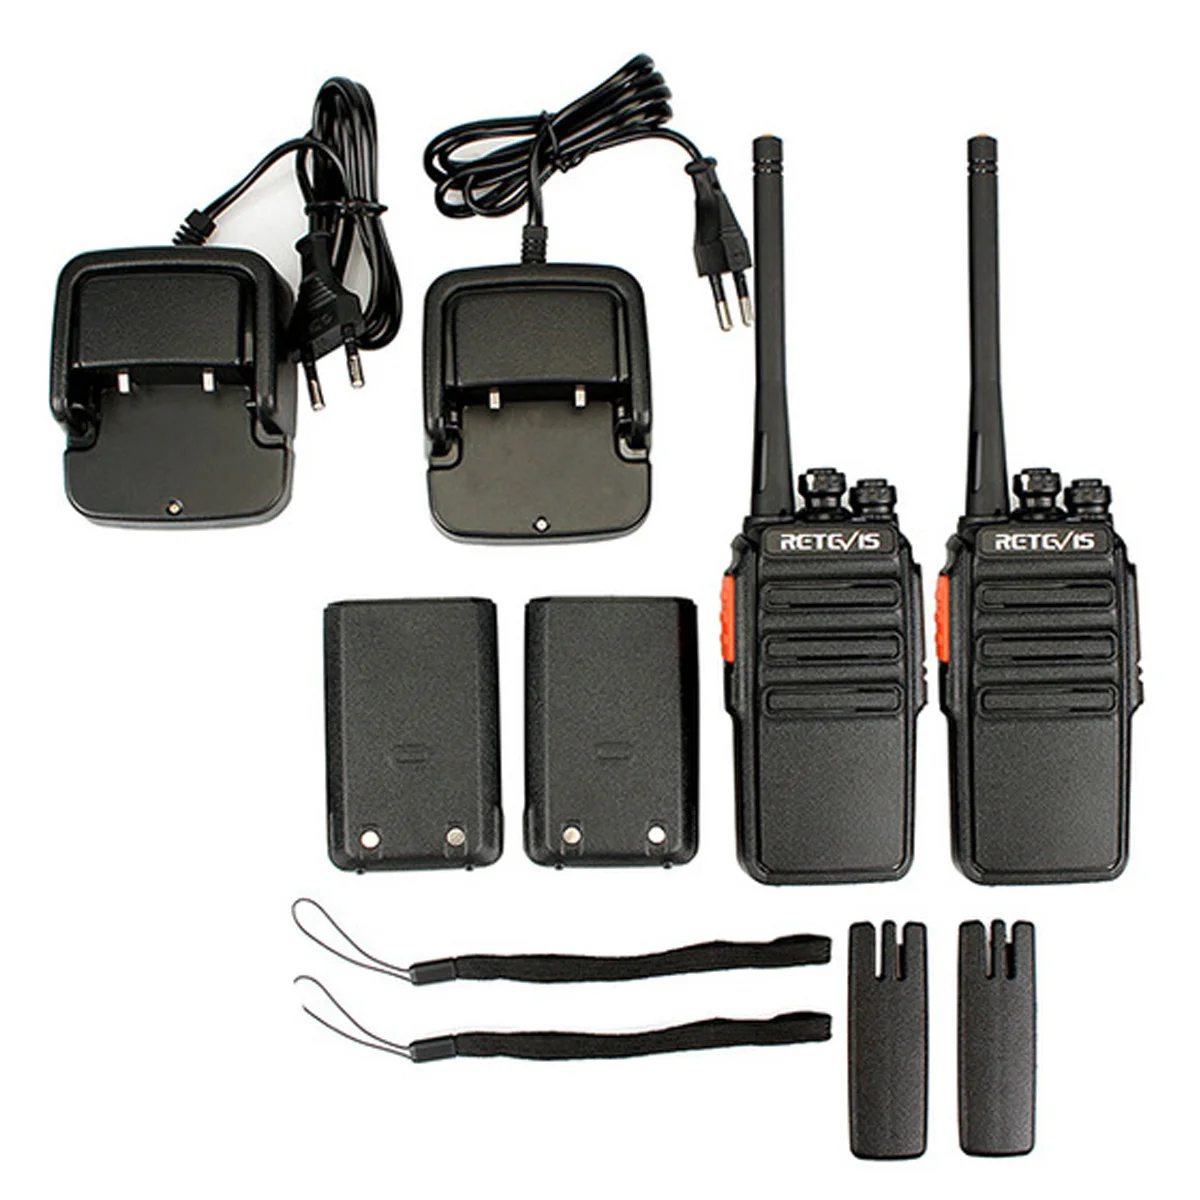 Wholesale Retevis RT24 PMR446 Walkie Talkie UHF Licence-Free handheld Two  Way Radio 16Channels Scan 0.5W TOT VOX For business Security From 